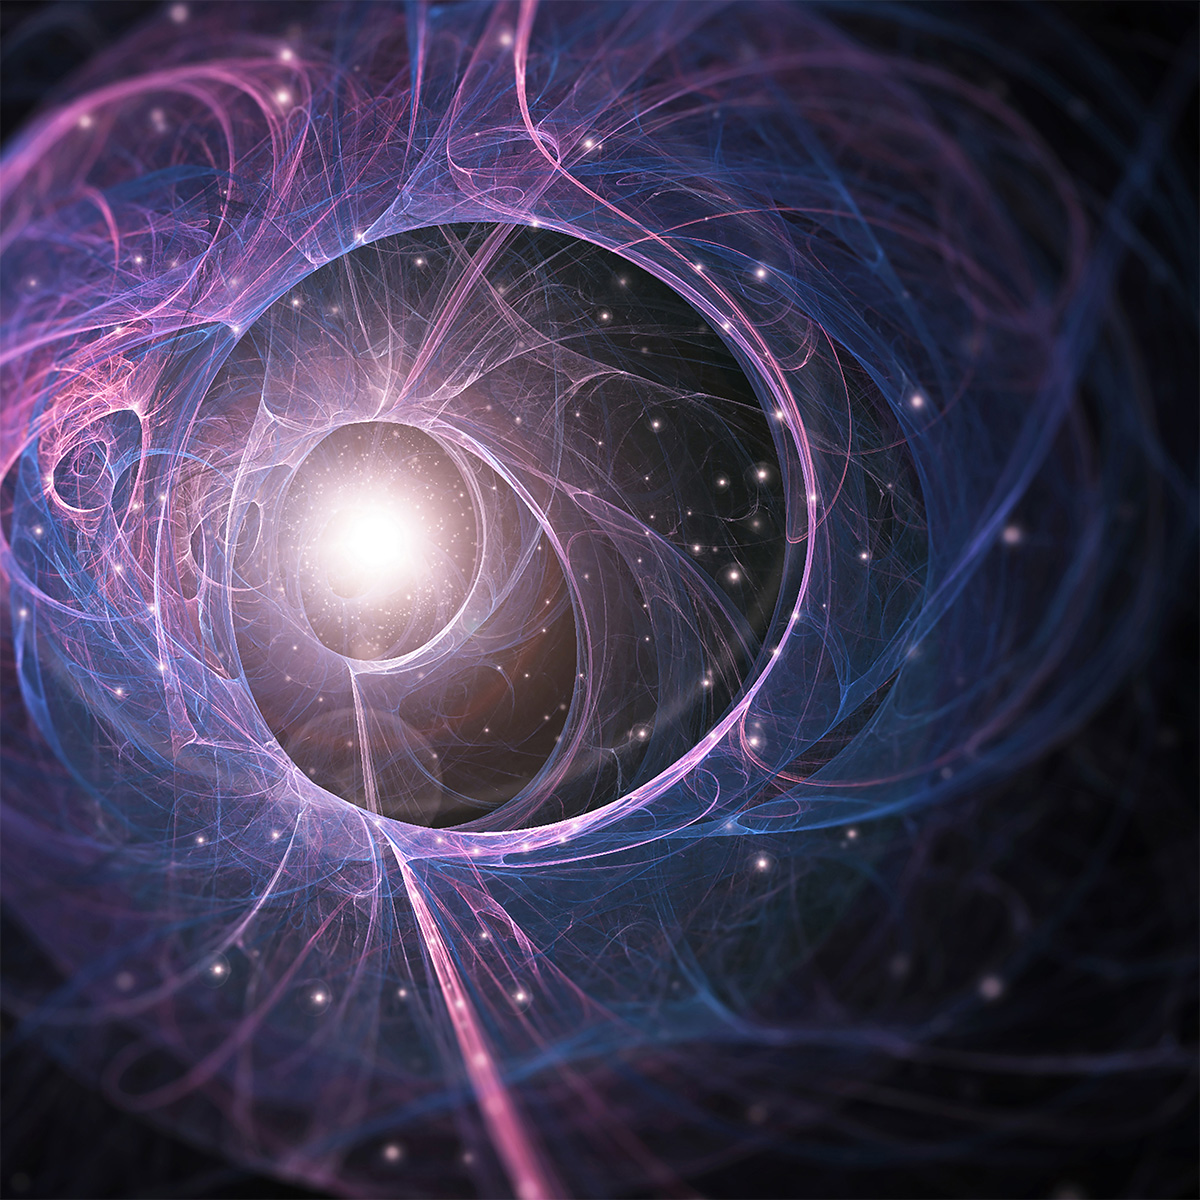 Space inspired image with purple and pink pulse lines going in a circle, on a dark background